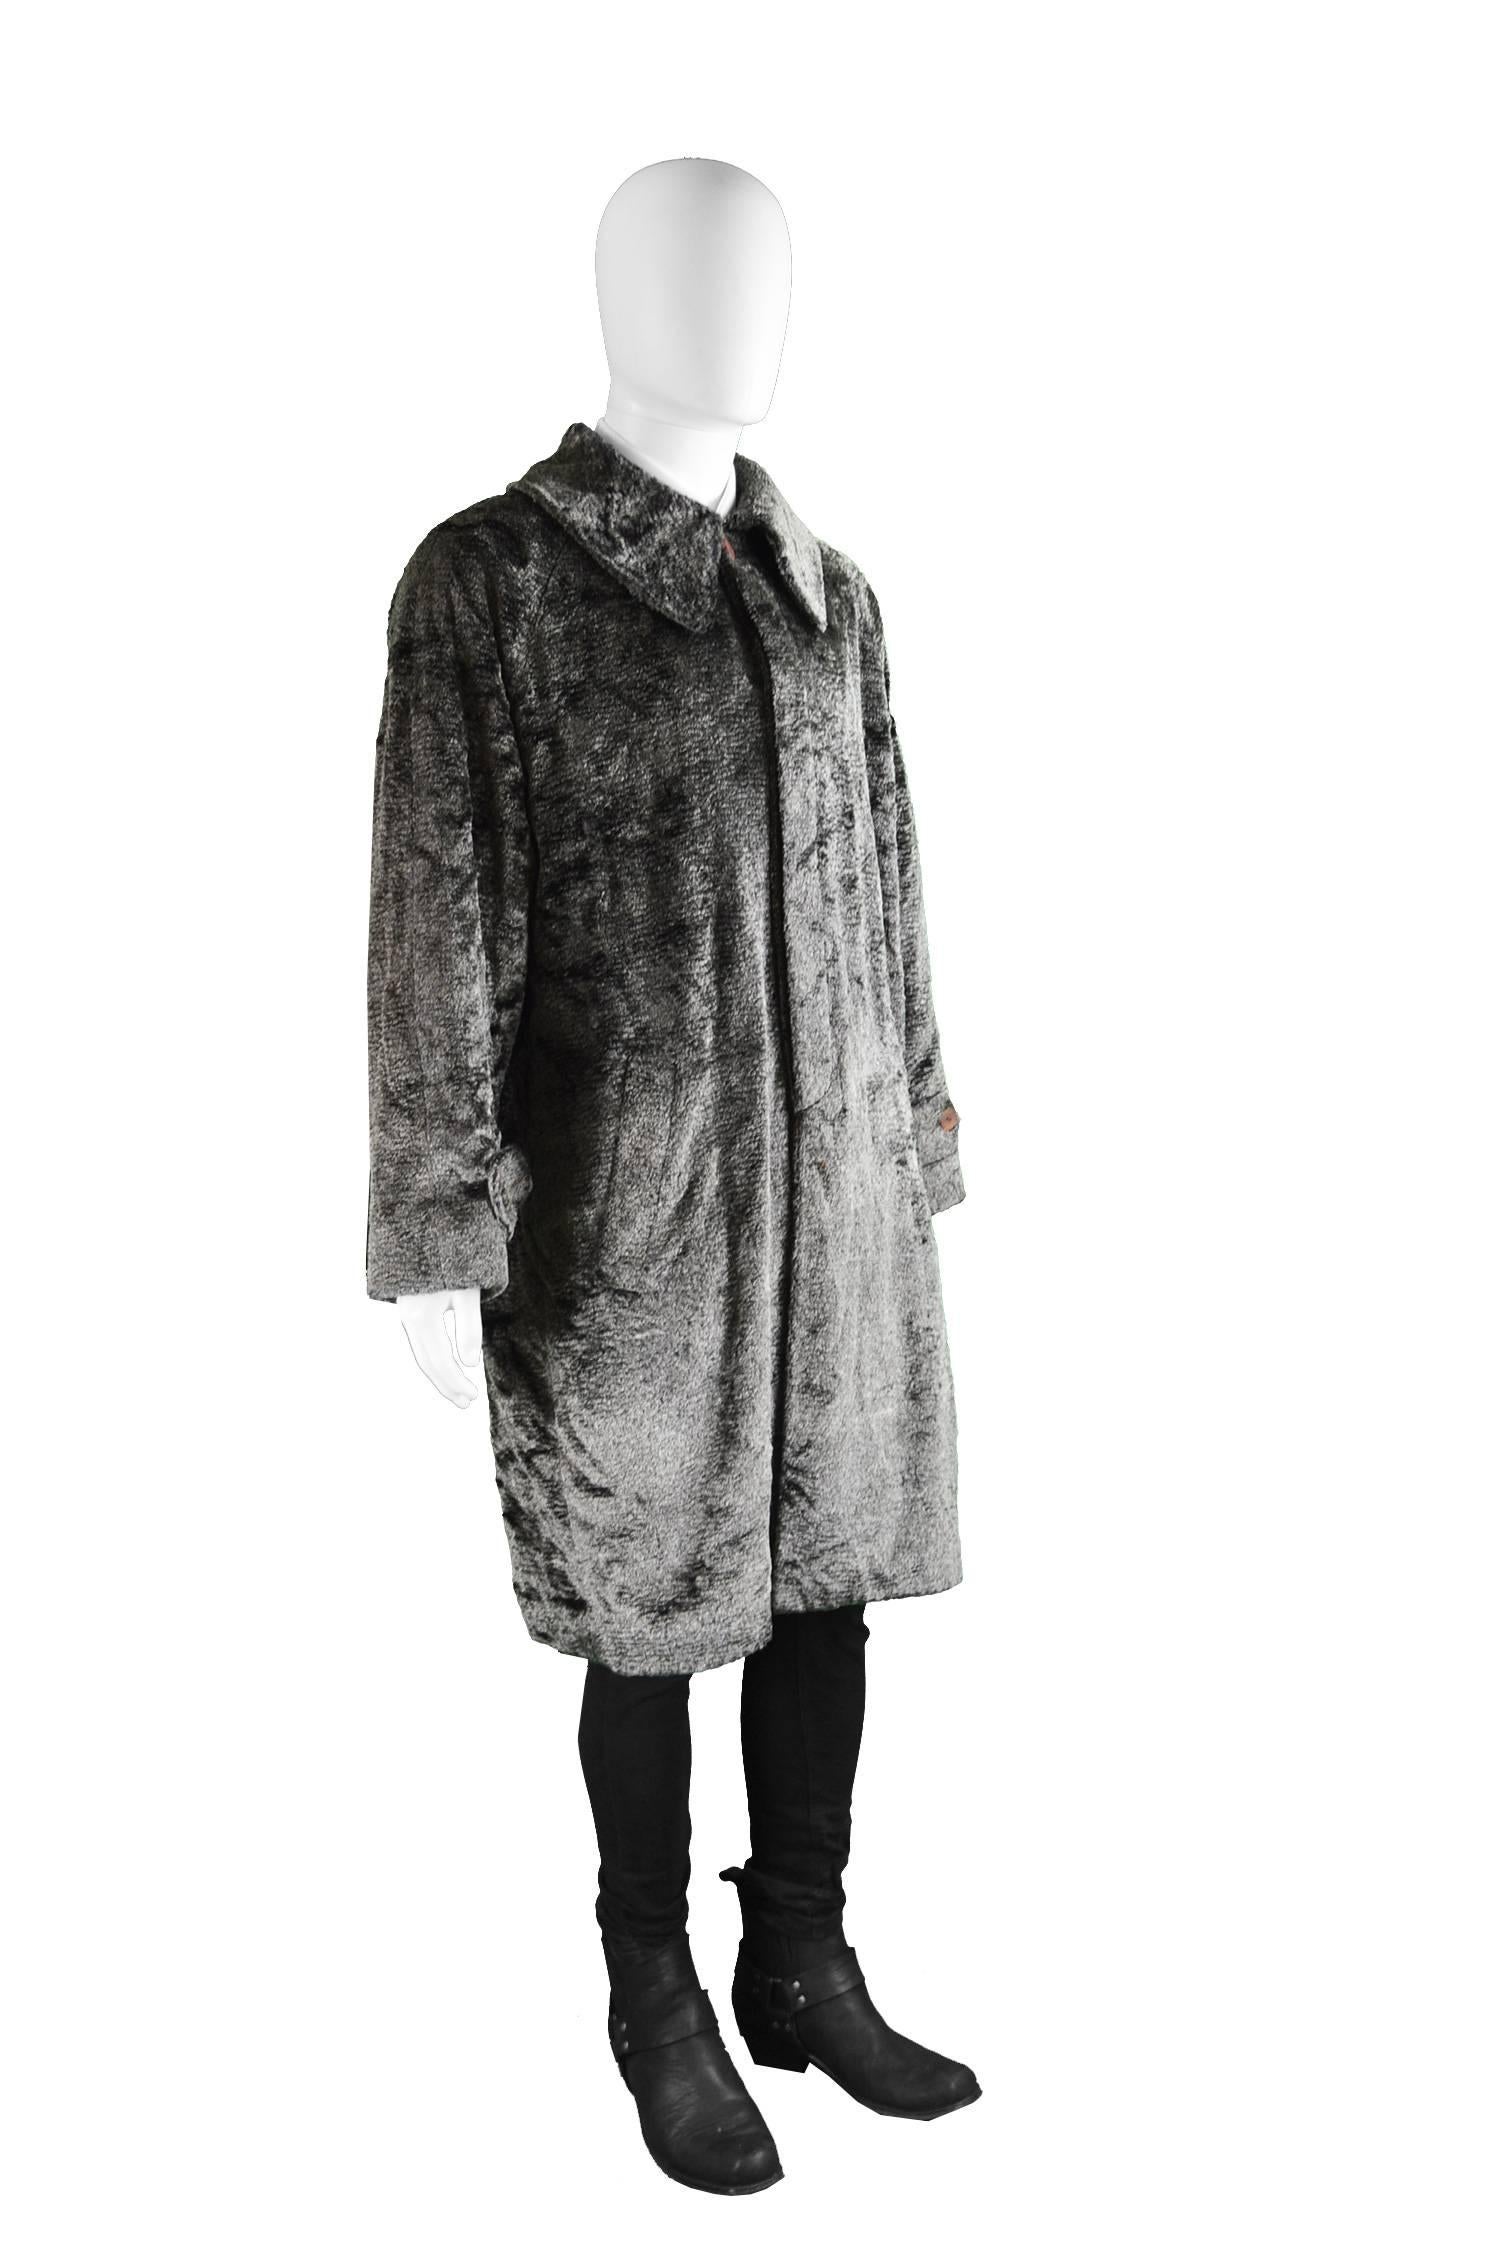 Calugi E Giannelli Mens Gray Faux Fur Vintage Belted Over Coat, 1980s For Sale 2